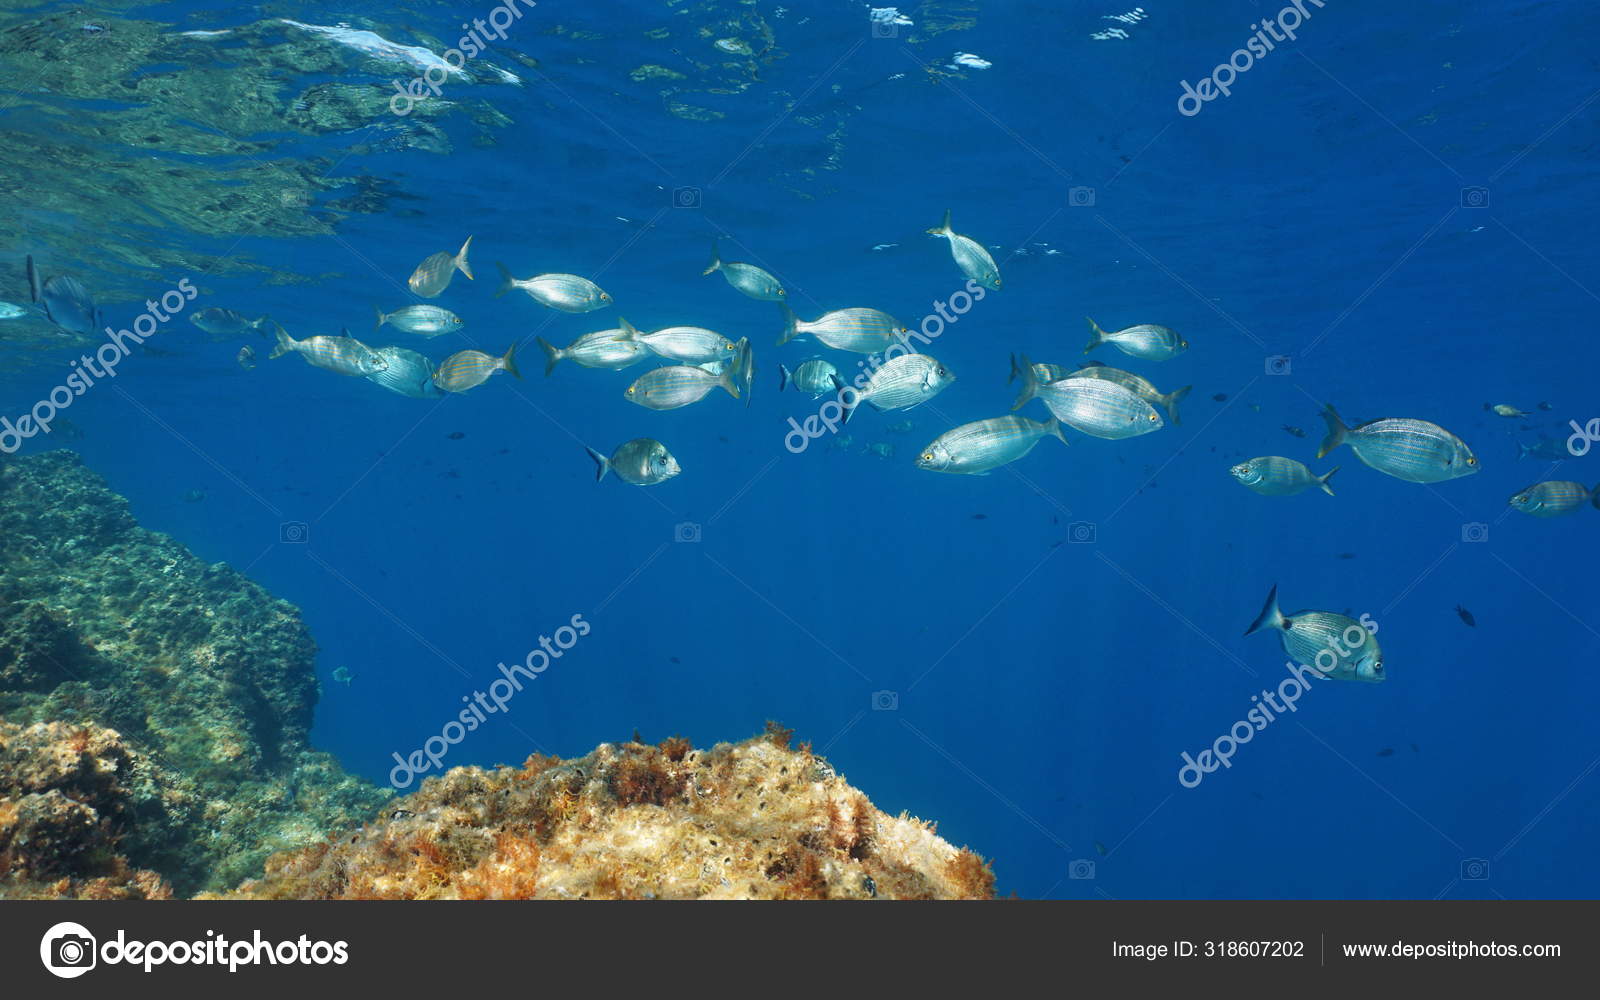 Fishes Of The Mediterranean Sea Underwater In The Marine Reserve